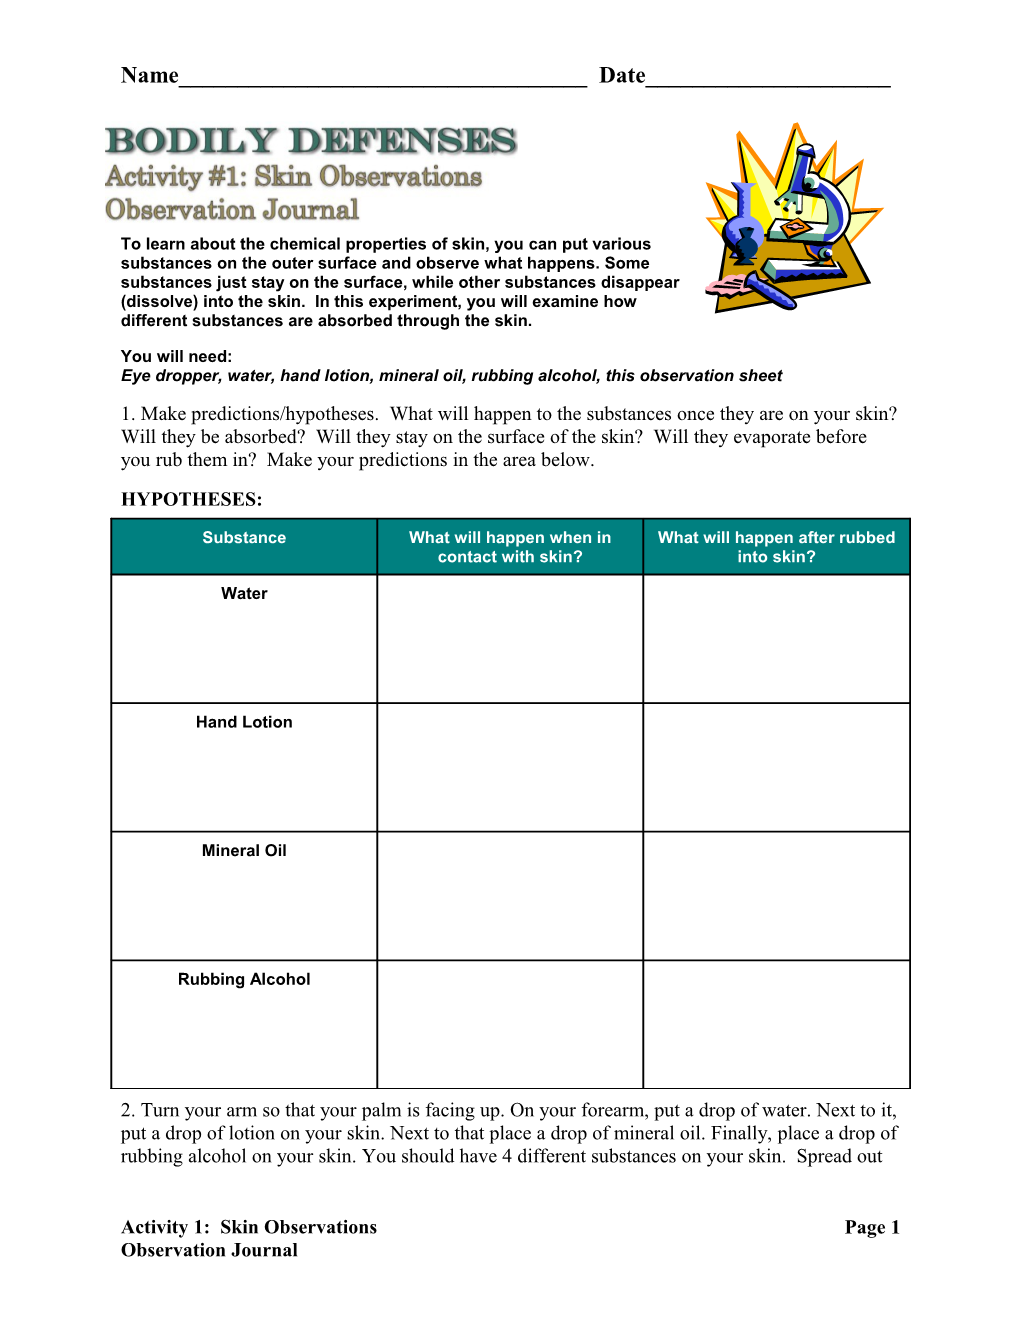 Activity Sheet: Cell Membranes - Spontaneous Formation